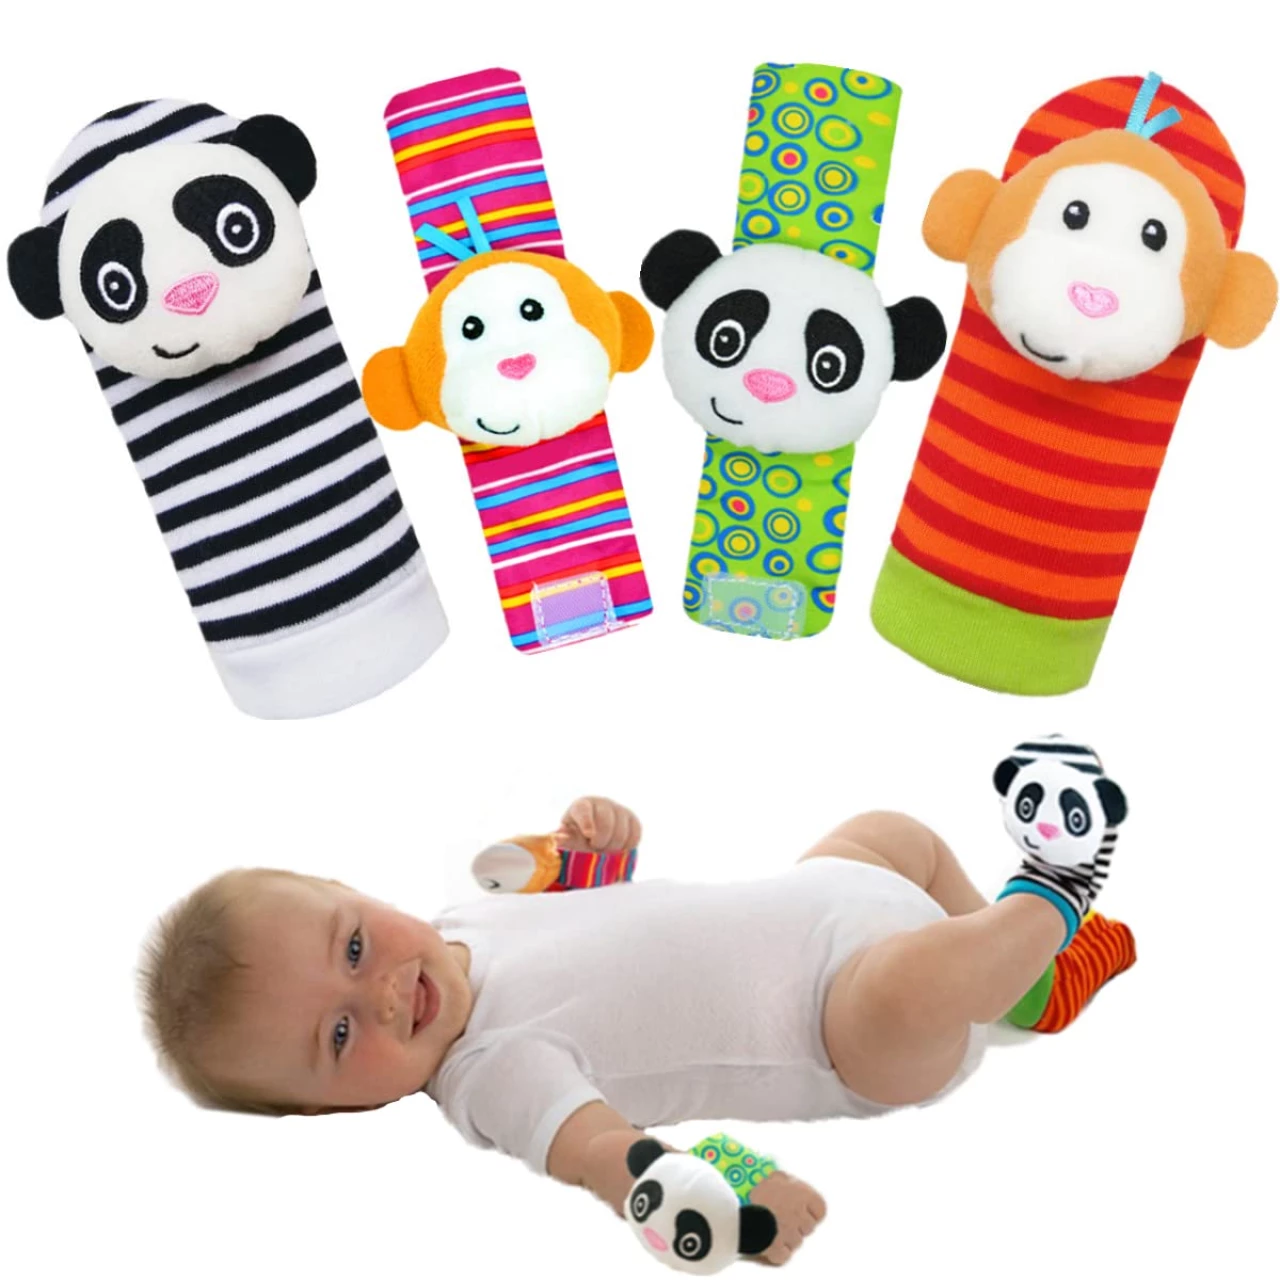 Kiesyo Infant Baby Toys 0 3 6 12 Months Wrist Rattles for Babies Rattle Socks Foot Finders Hand Arm Wristbands Rattles Leg Ankle Foot Rattle Toys Sensory Baby Gift for Newborn Boy Girl